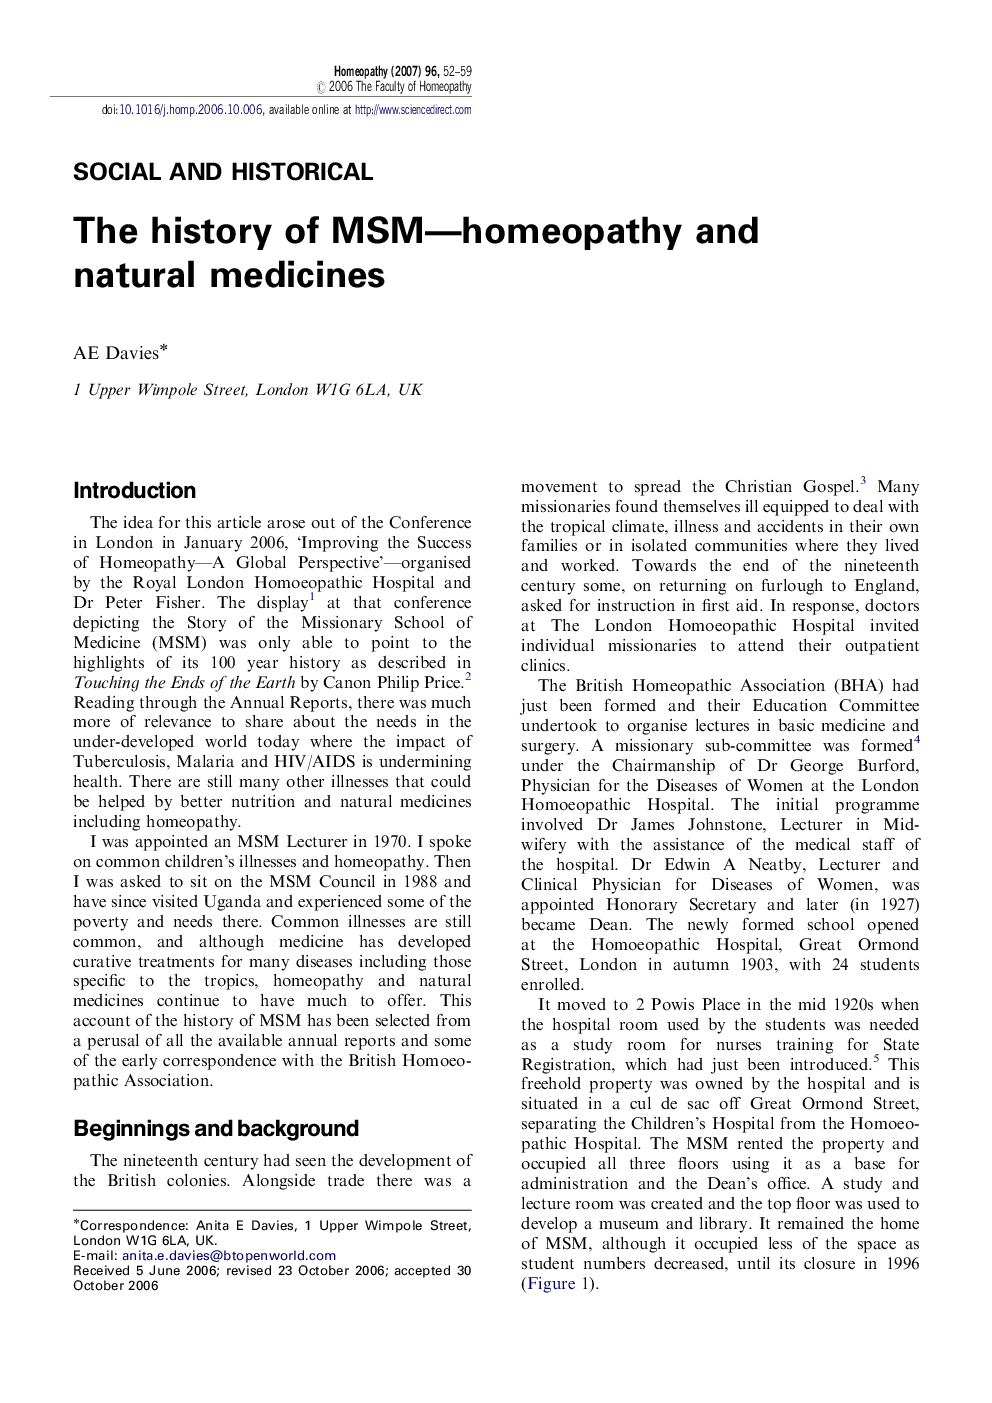 The history of MSM-homeopathy and natural medicines